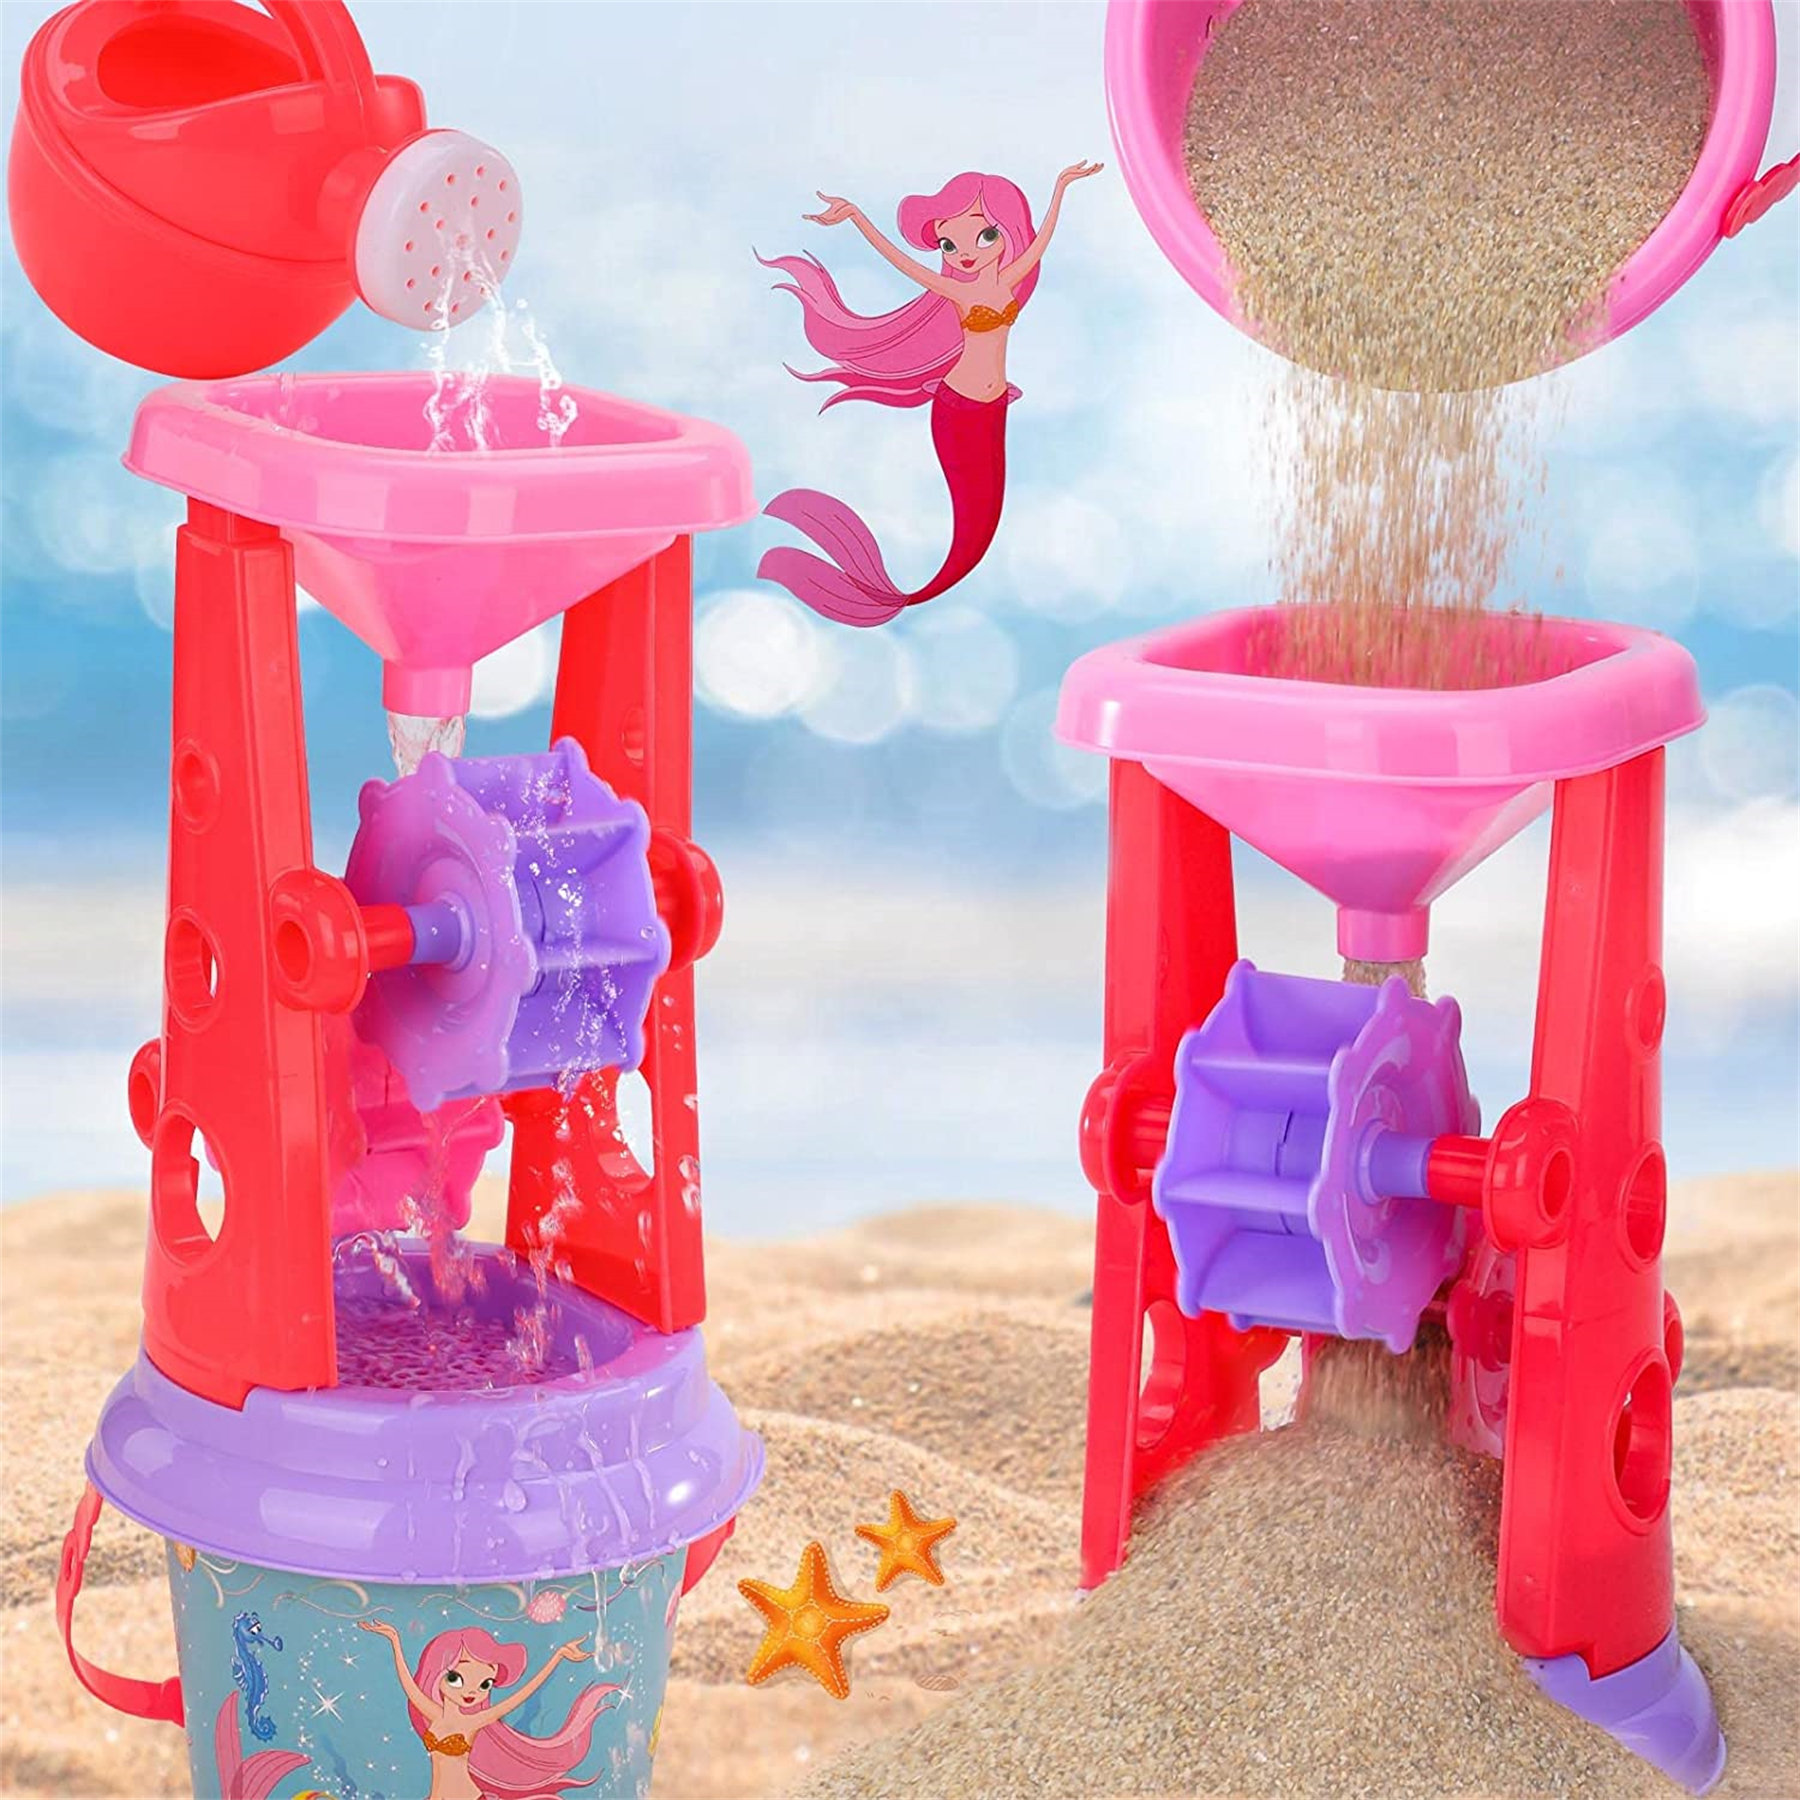 Baby Bath Toy Plastic Watering Pot Beach Play Sand Water Tool Kids Toys Gift 'AU 